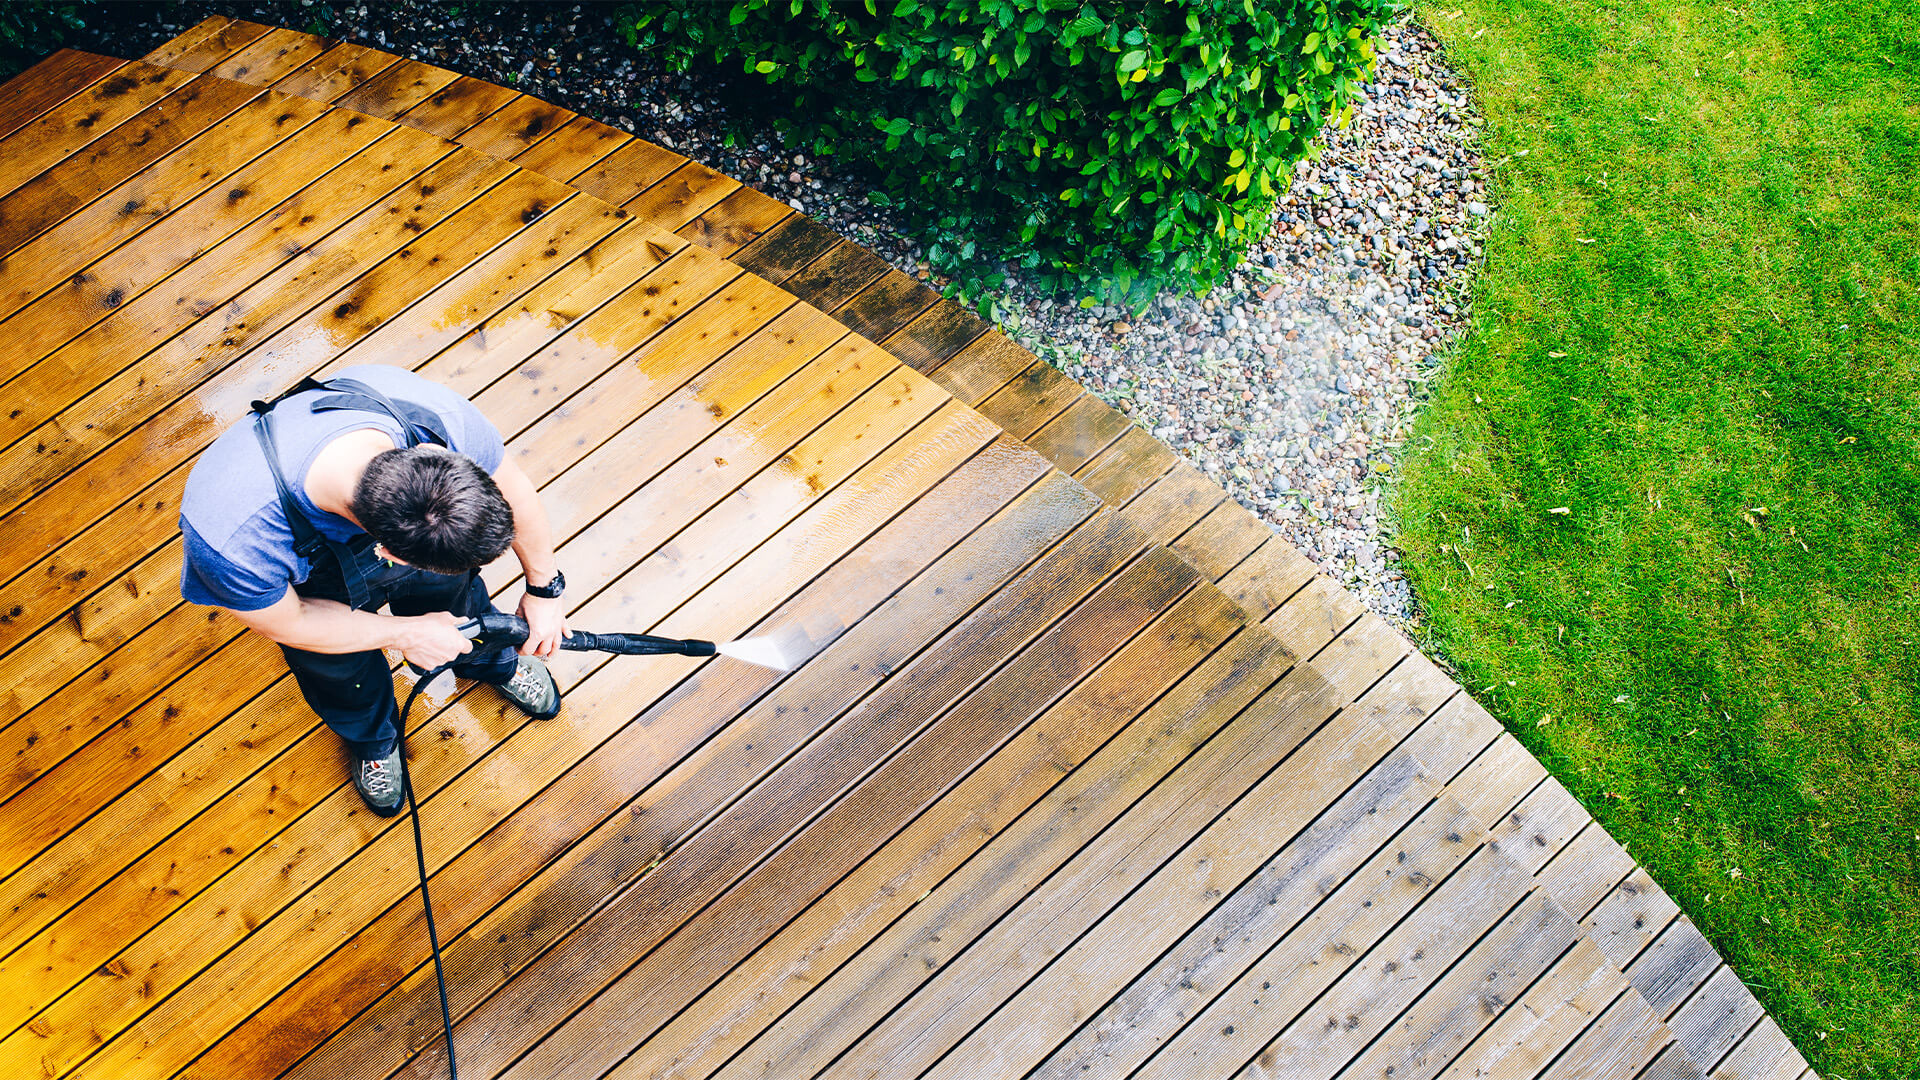 Man using a pressure washer on home interior decking